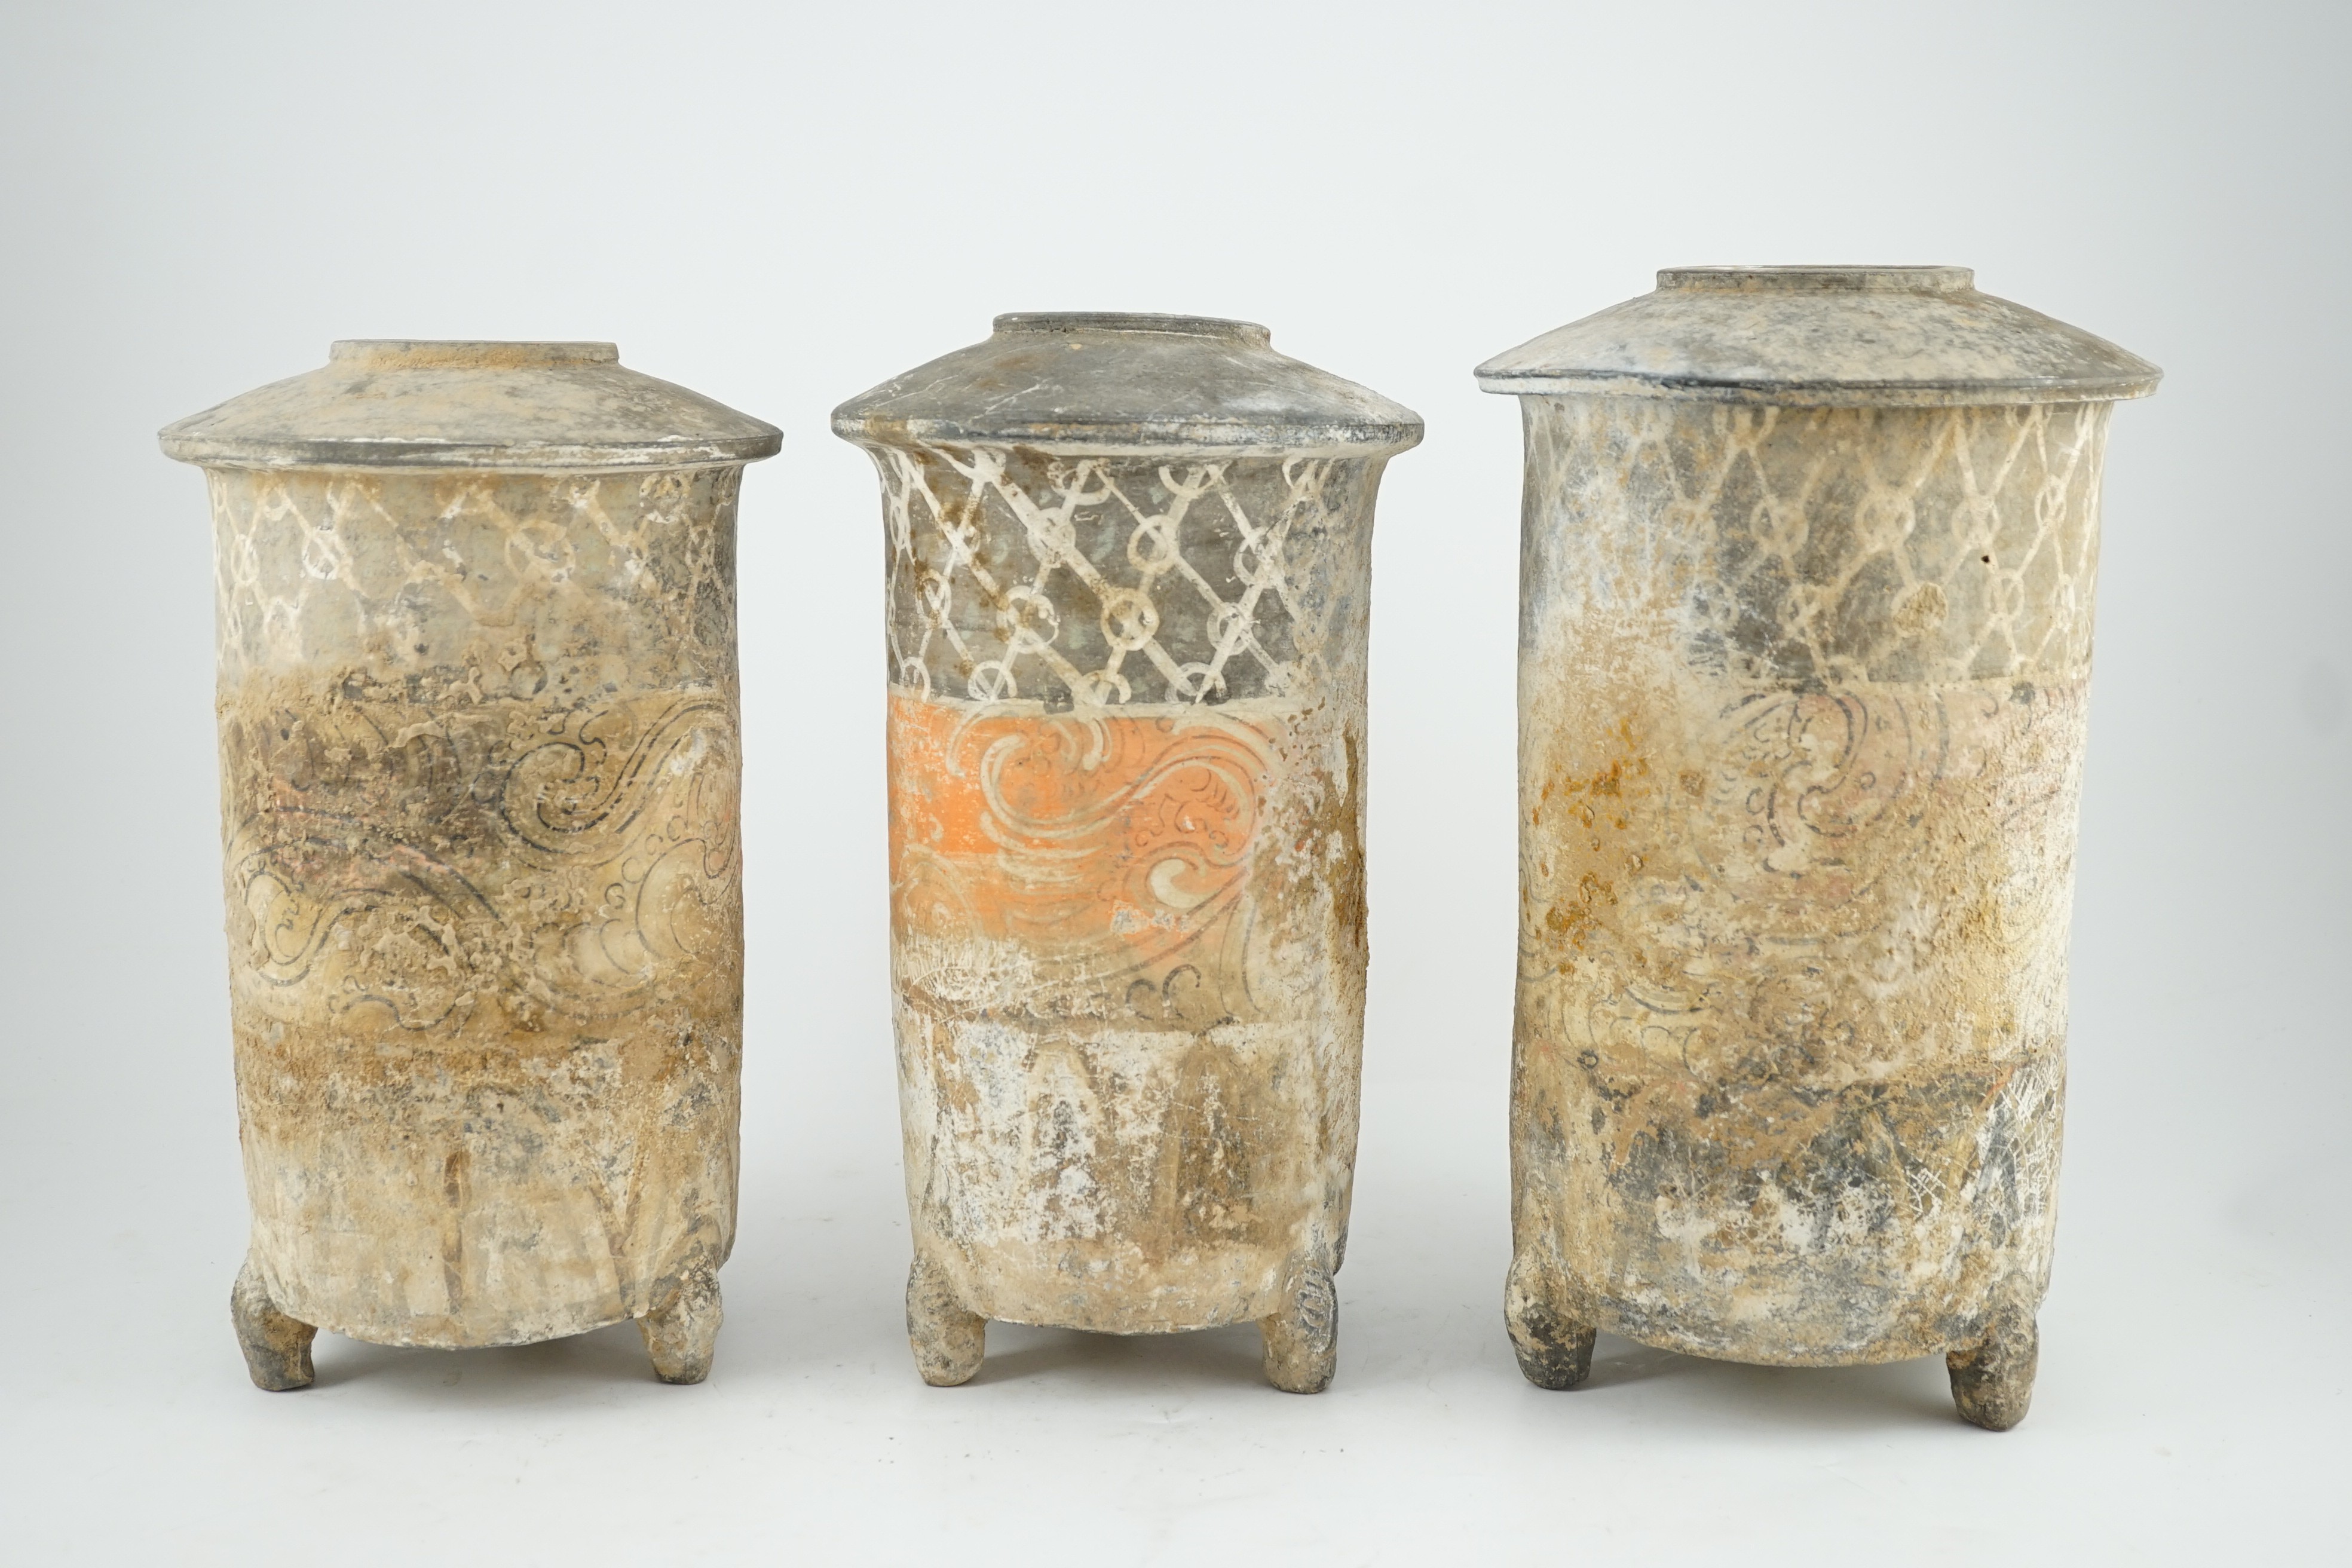 Three Chinese pigment painted grey pottery ‘granary’ jars, Han dynasty (200BCE - 220CE), 29.5 and 32cm high